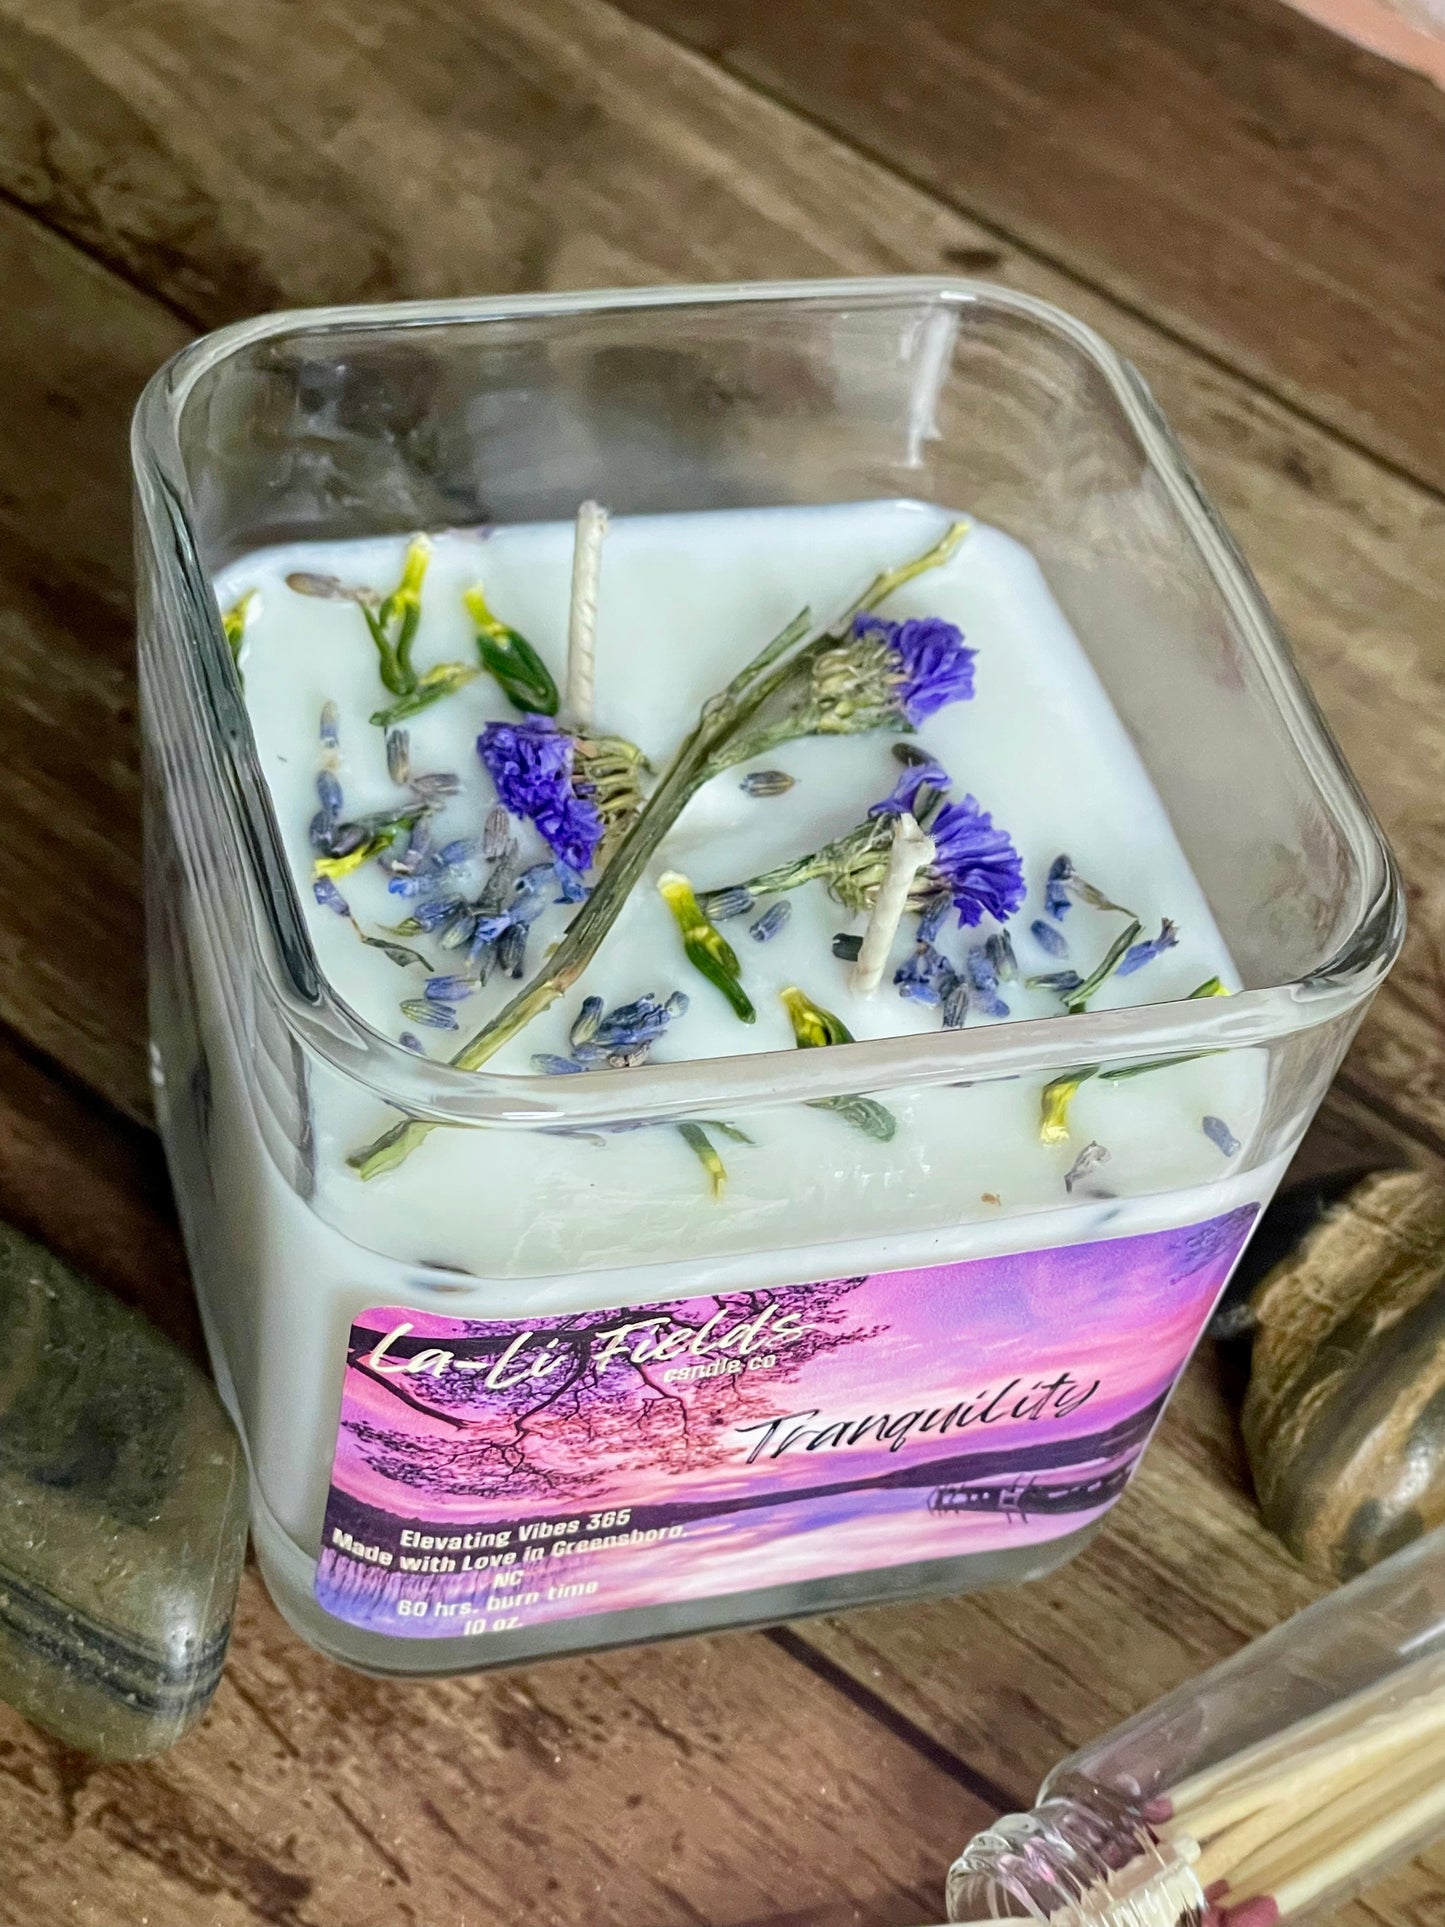 Tranquility- Aromatherapy Candle